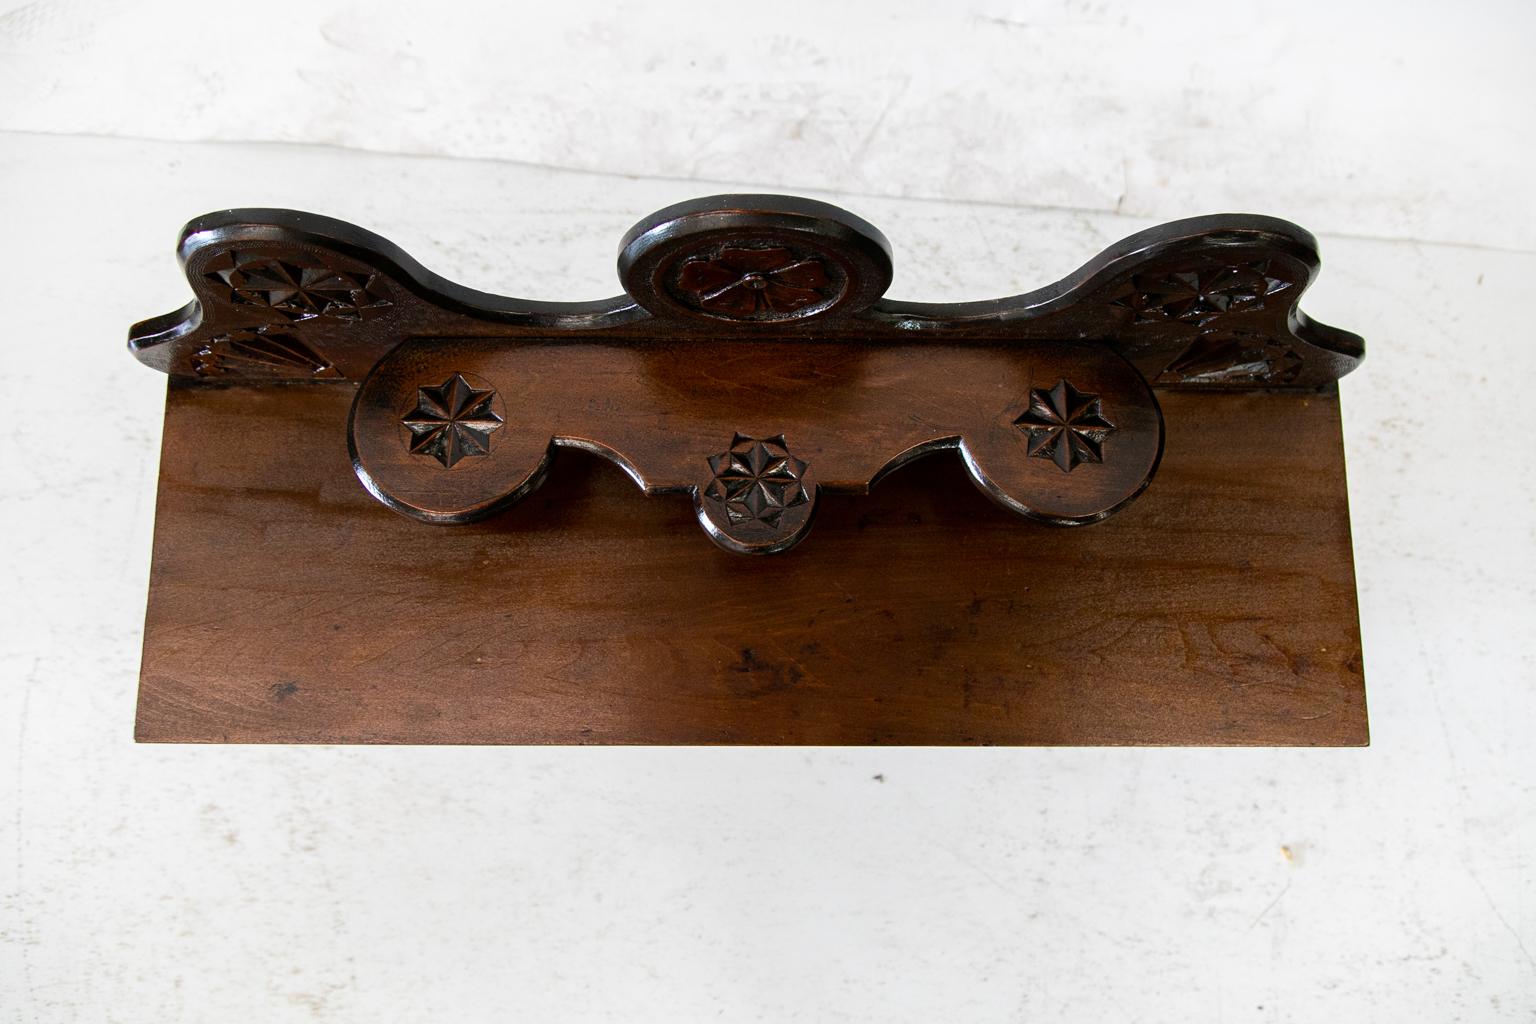 Carved English hanging shelf, the door has a floral center panel framed with carved moldings, stippling, and stylized quarter fans. The inside has one shelf with a center drawer and matching side panels. The side shelves are supported by turned